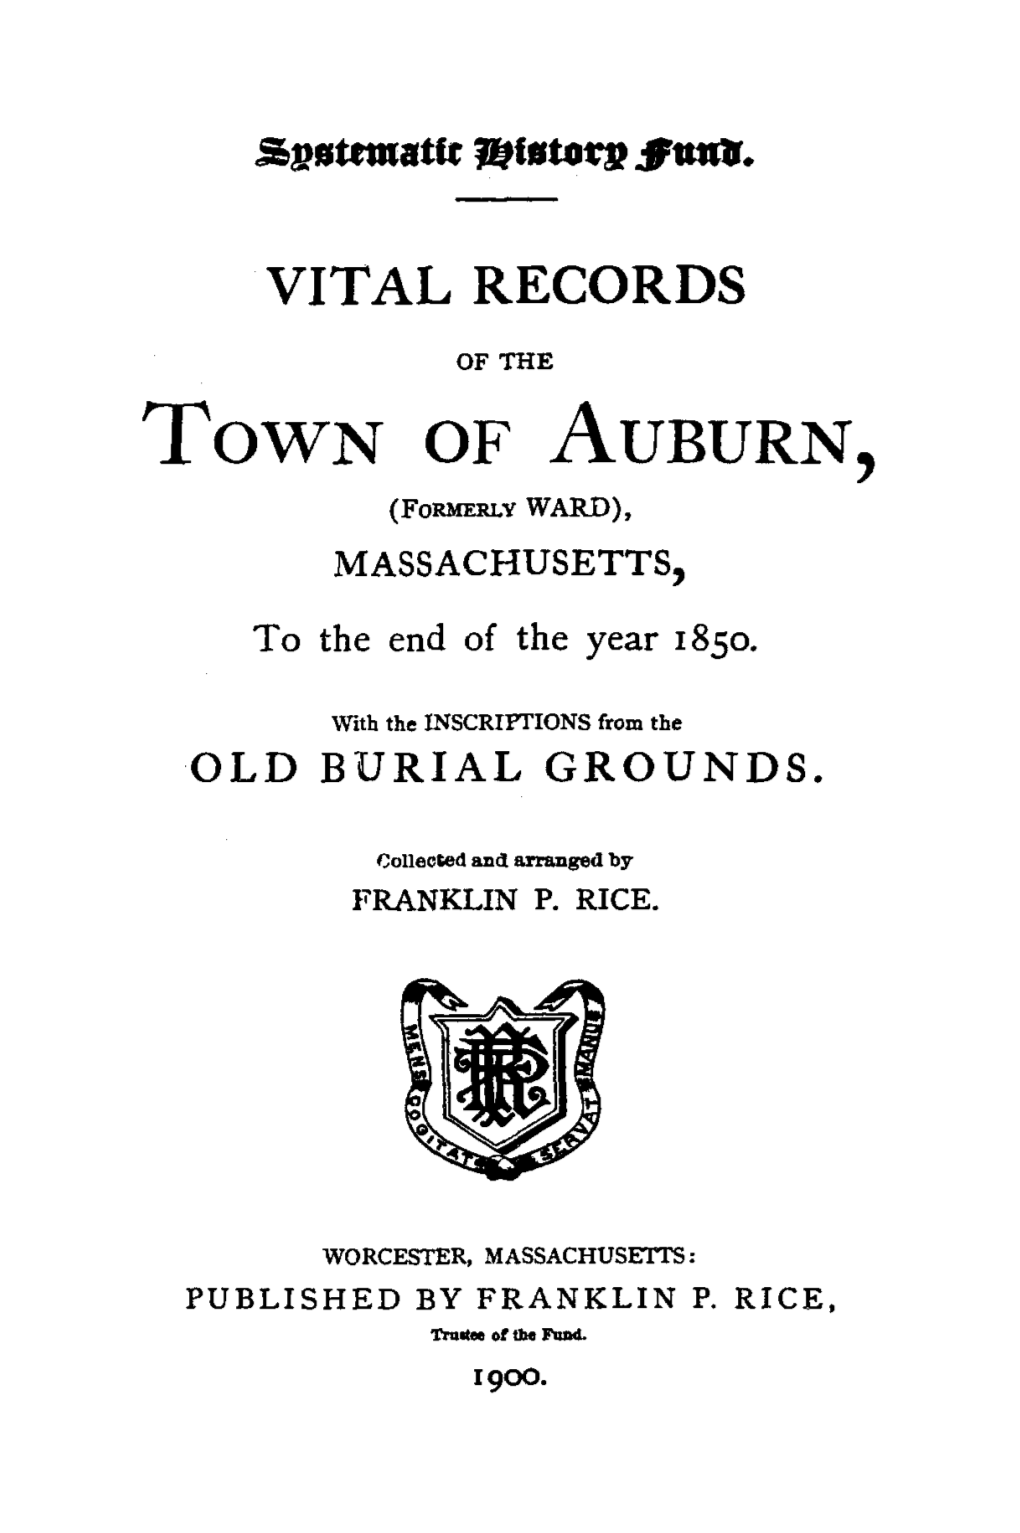 Town of AUBURN, {FORMERLY WARD}, MASSACHUSETTS, to the End of the Year 1850